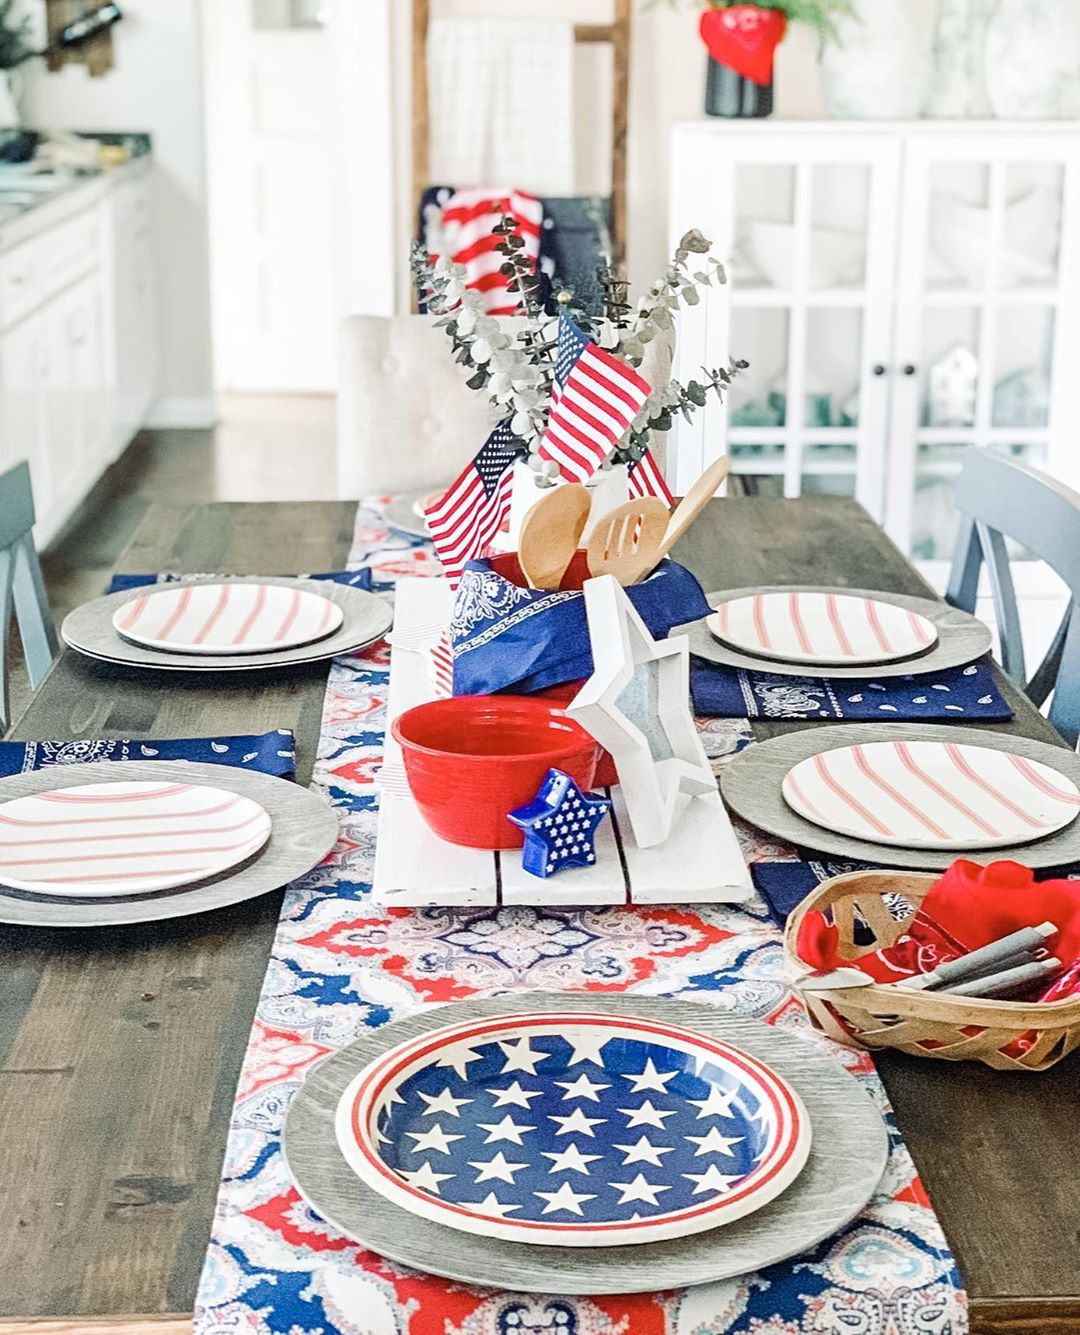 Individual Placemats for a Fourth of July Party. Photo by Instagram user @kbelle_home